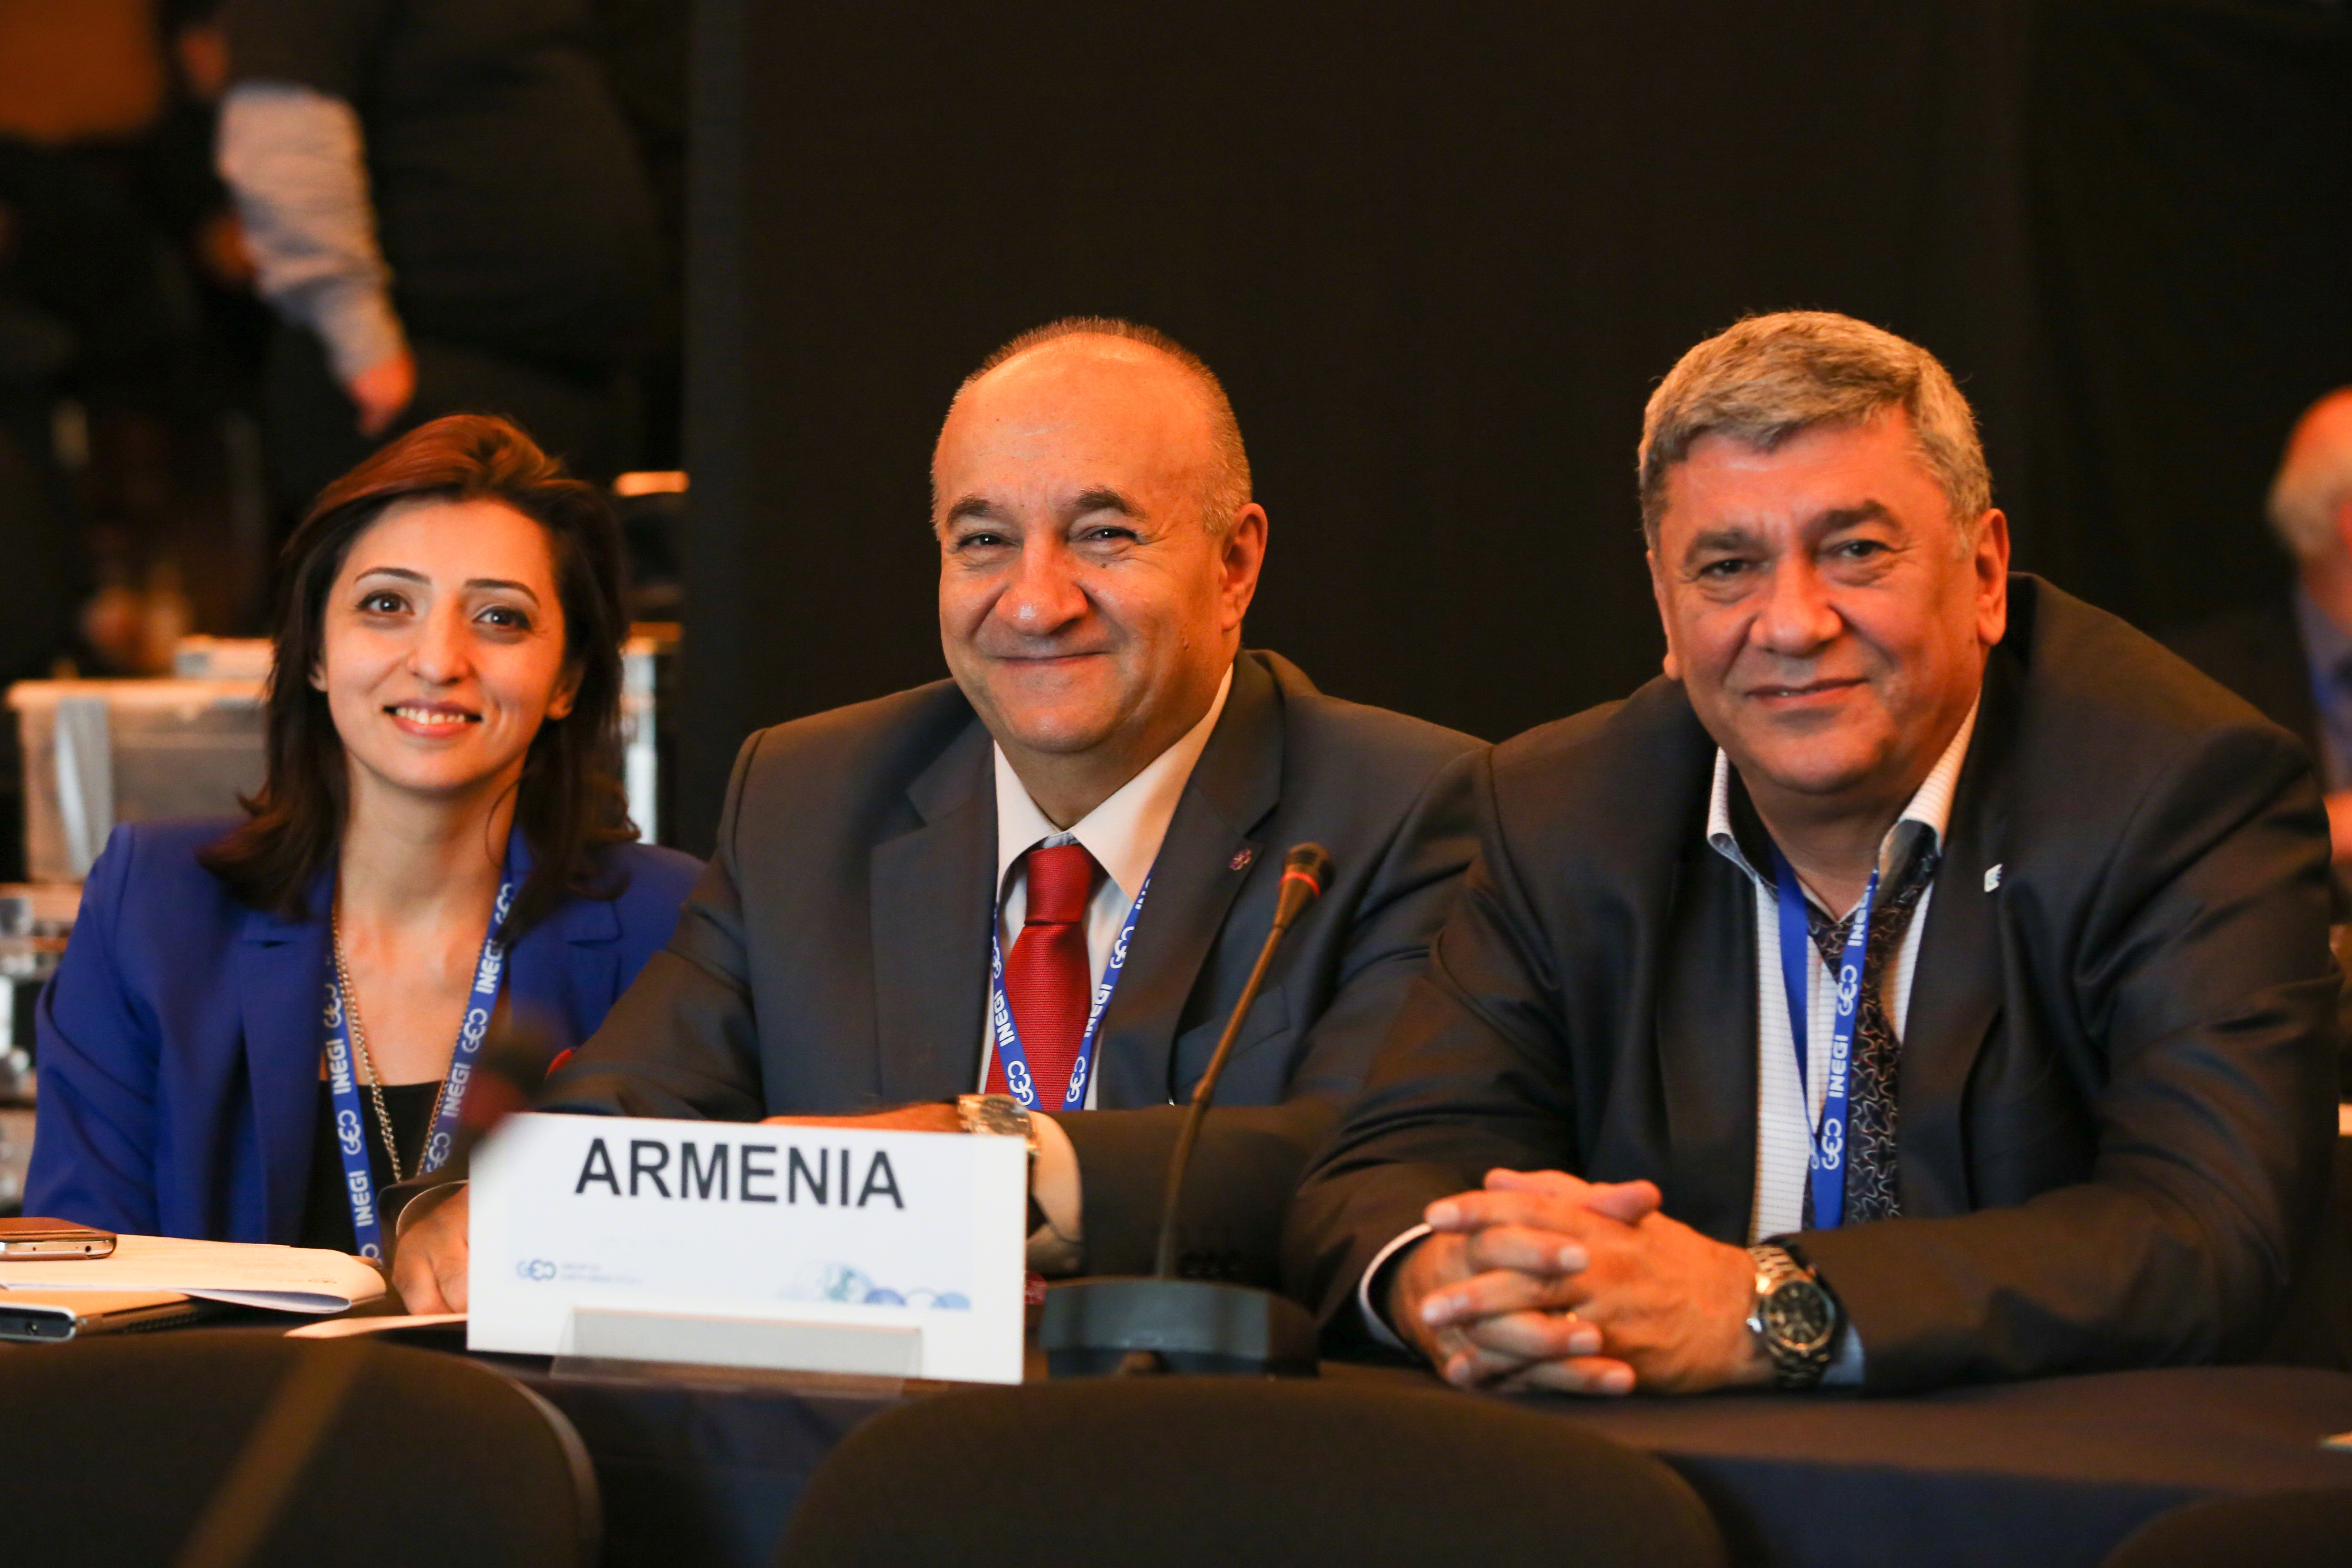 (L-R) Shushanik Asmaryan (Head of the GIS and Remote Sensing Department of the Center for Ecological-Noosphere Studies [CENS]), Professor Armen Saghatelyan (CENS Director and GEO Principal) and Professor Samvel Haroutiunian (Chairman of the State Committee of Sciences of the Ministry of Education and Science of Armenia) at the 2015 GEO Ministerial in Mexico City, Mexico